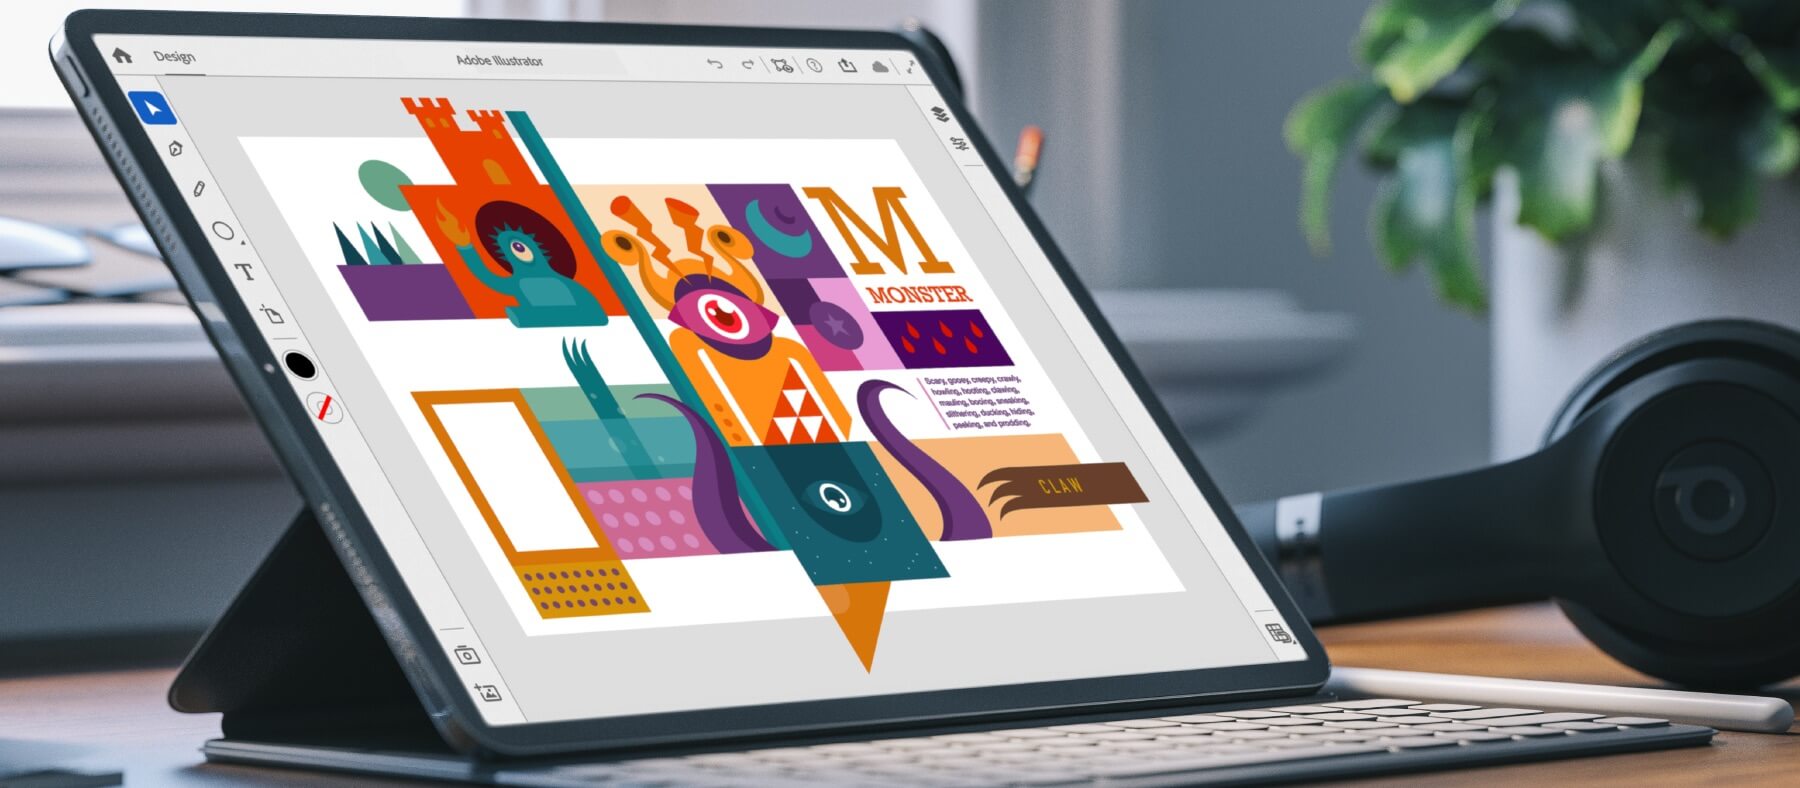 Adobe is also building Illustrator for iPad